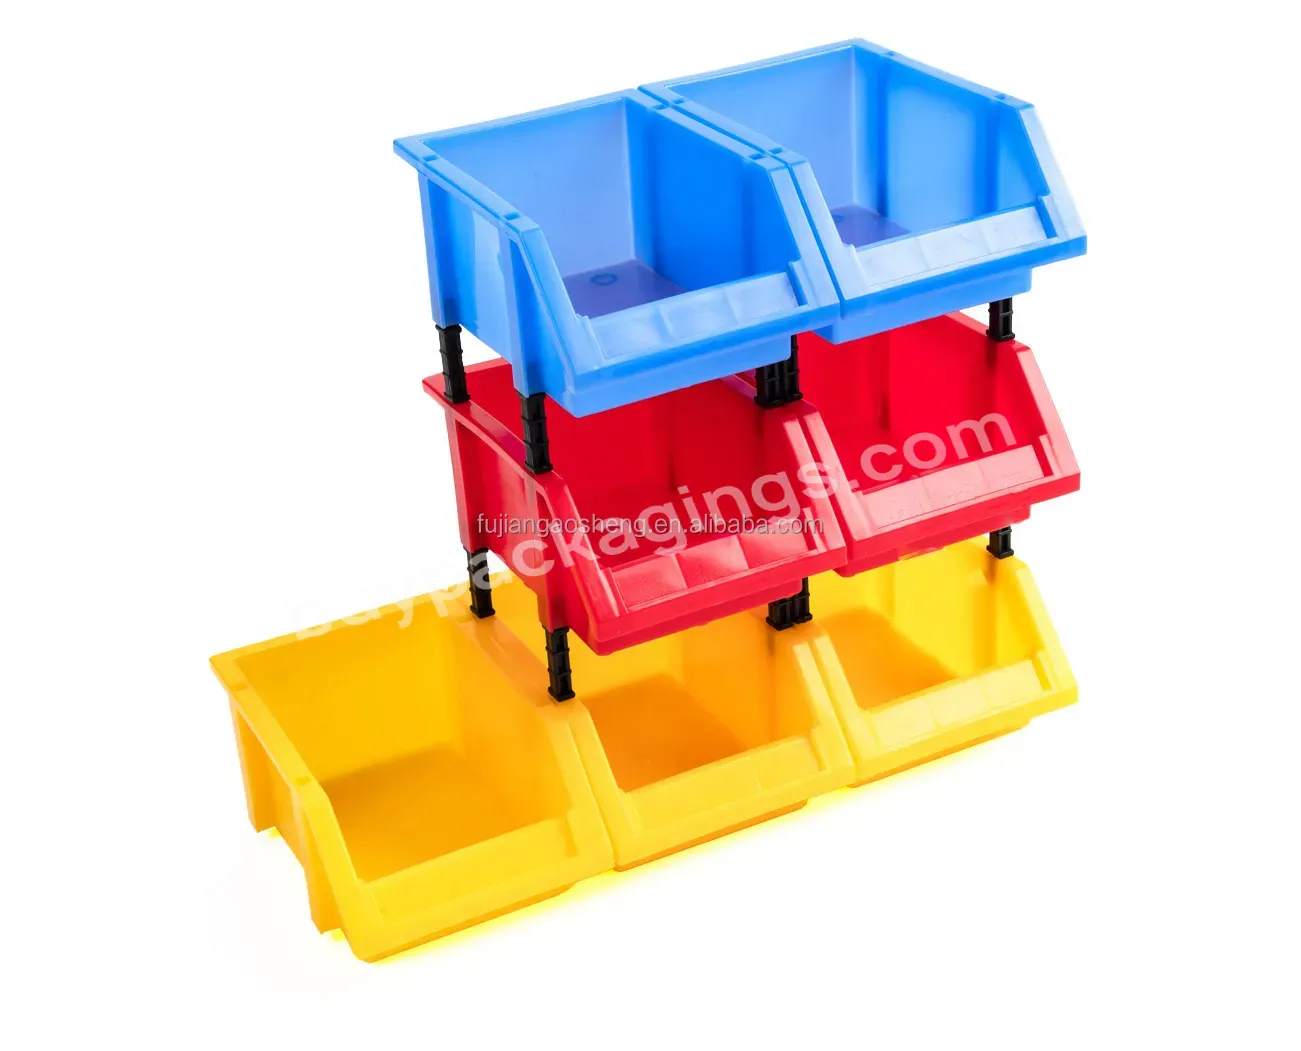 Cheap Price Shelf Bins For Industrial Plastic Portable Boxes Plastic Stackable And Divisible Storage Shelf Bins - Buy Kids Plastic Storage Bins,Cheap Plastic Storage Bins,Stackable Bread Bin.